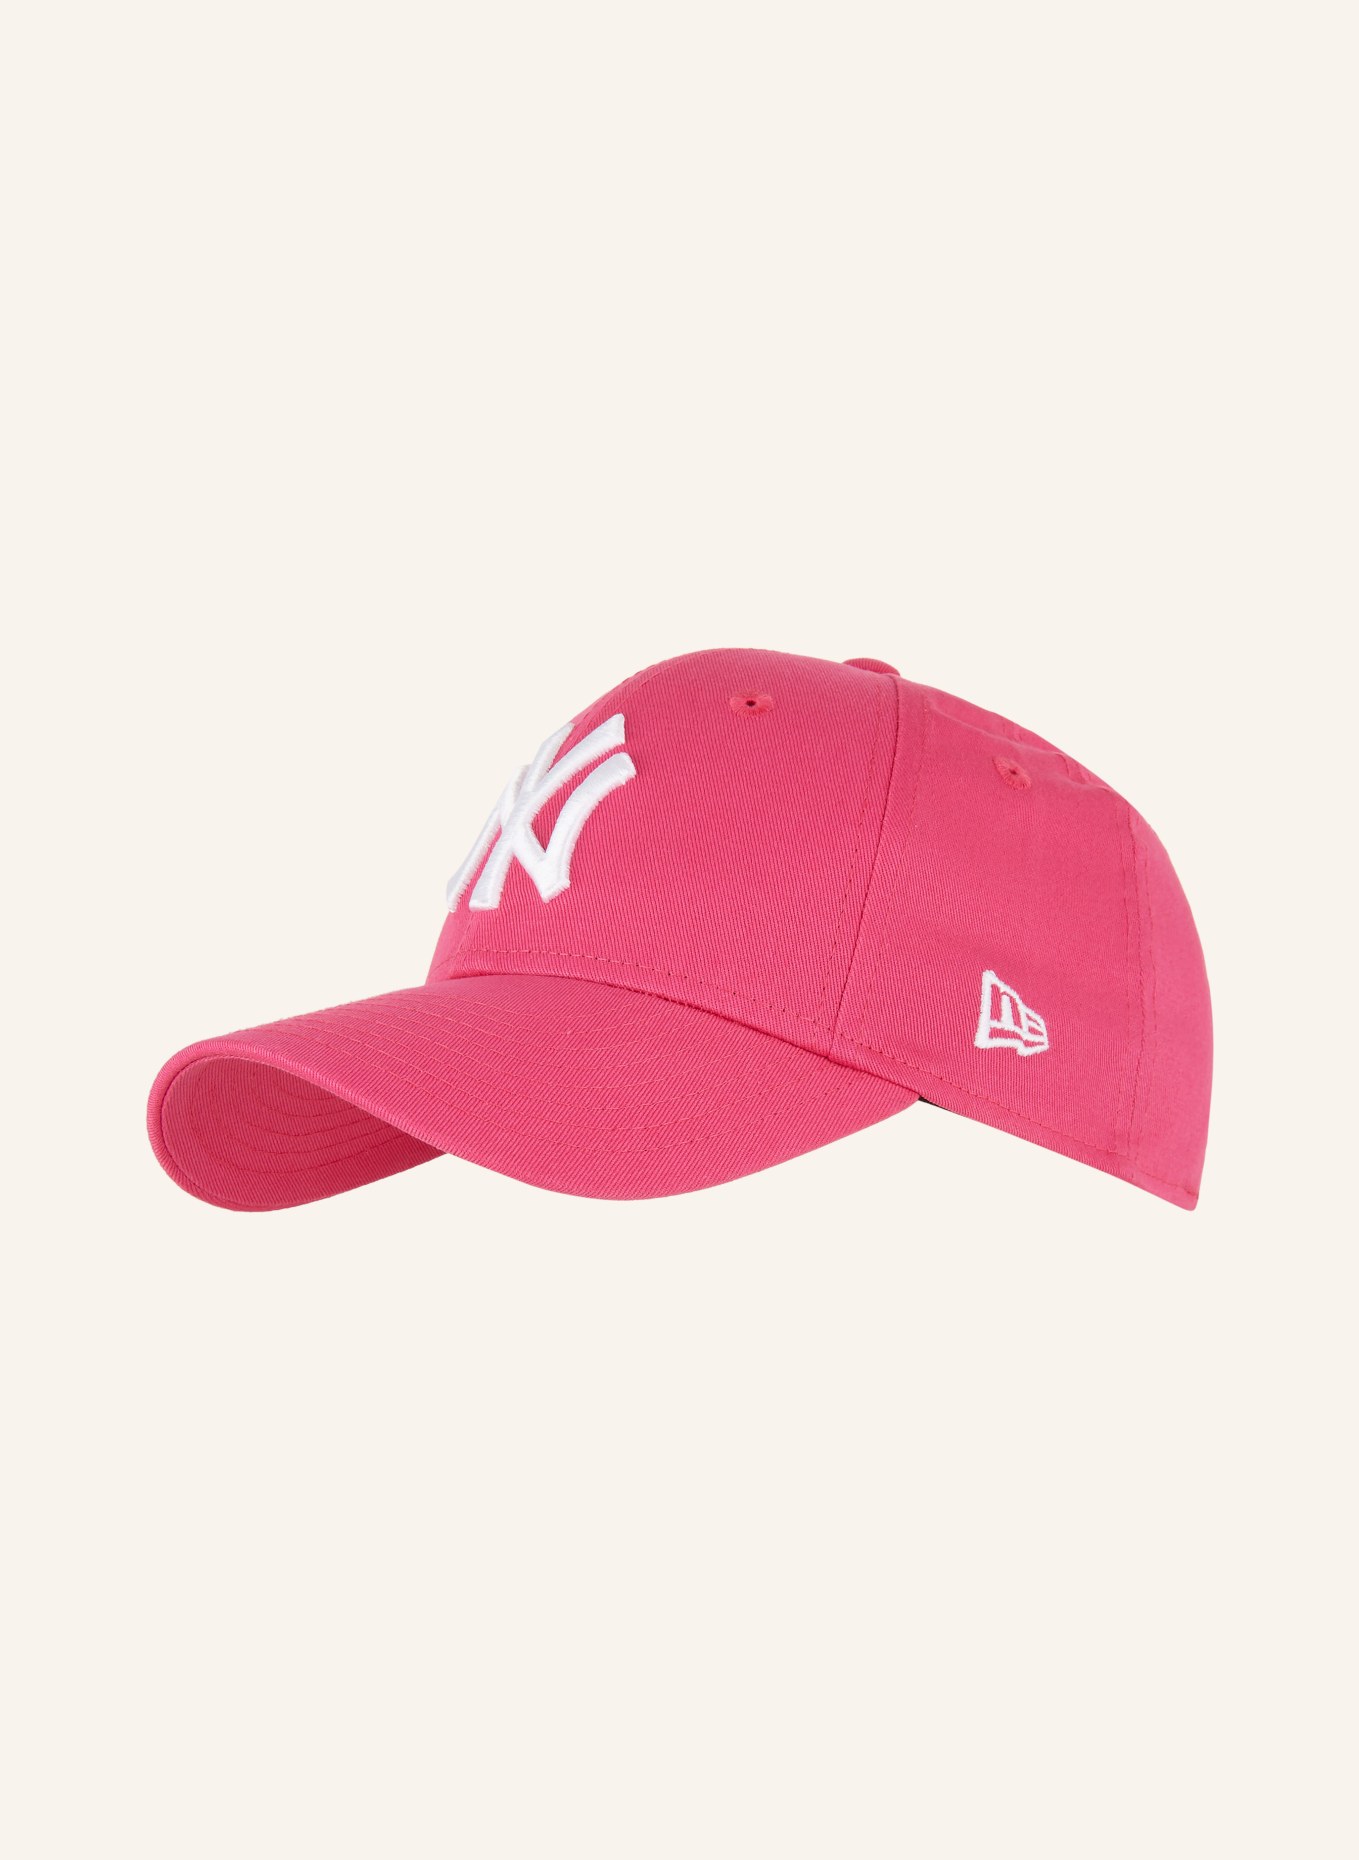 NEW ERA Cap LEAGUE ESSENTIAL 9FORTY®, Farbe: PINK/ WEISS (Bild 1)